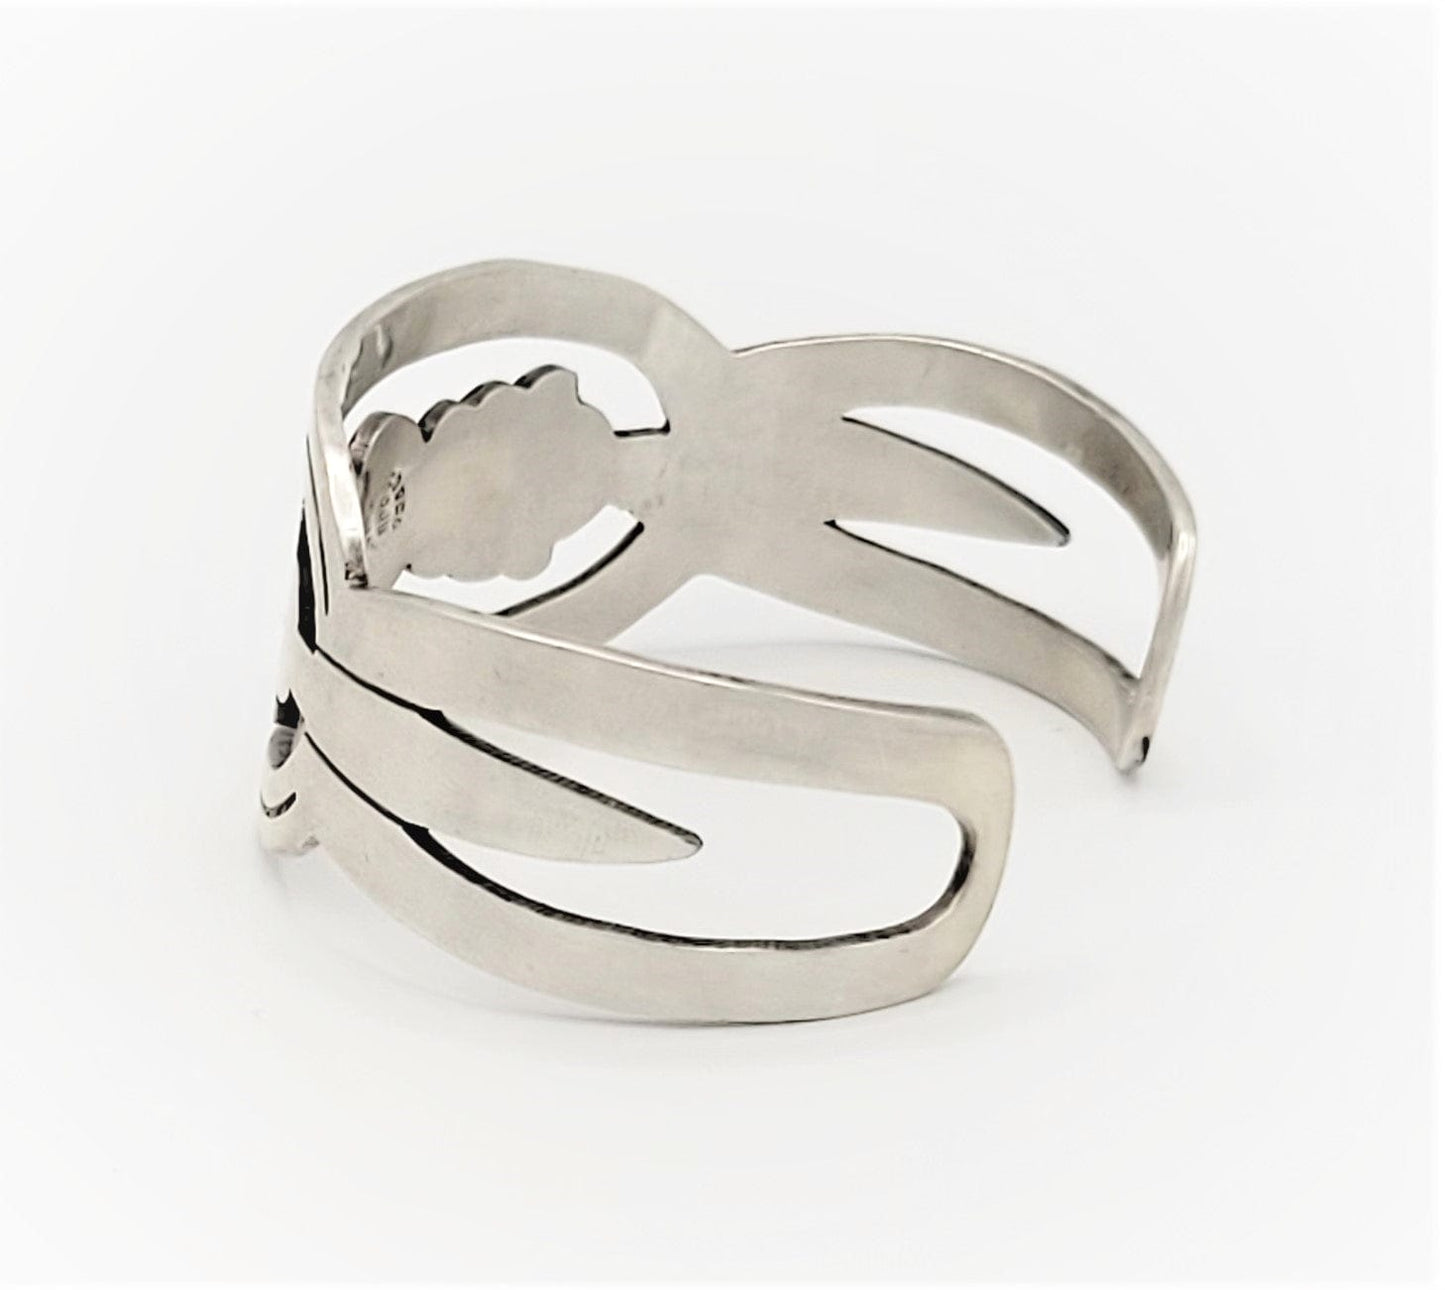 Taxco Jewelry Taxco Sterling Modernist Cuff Bracelet Signed Stamped Eagle 1 Circa 1960-70s